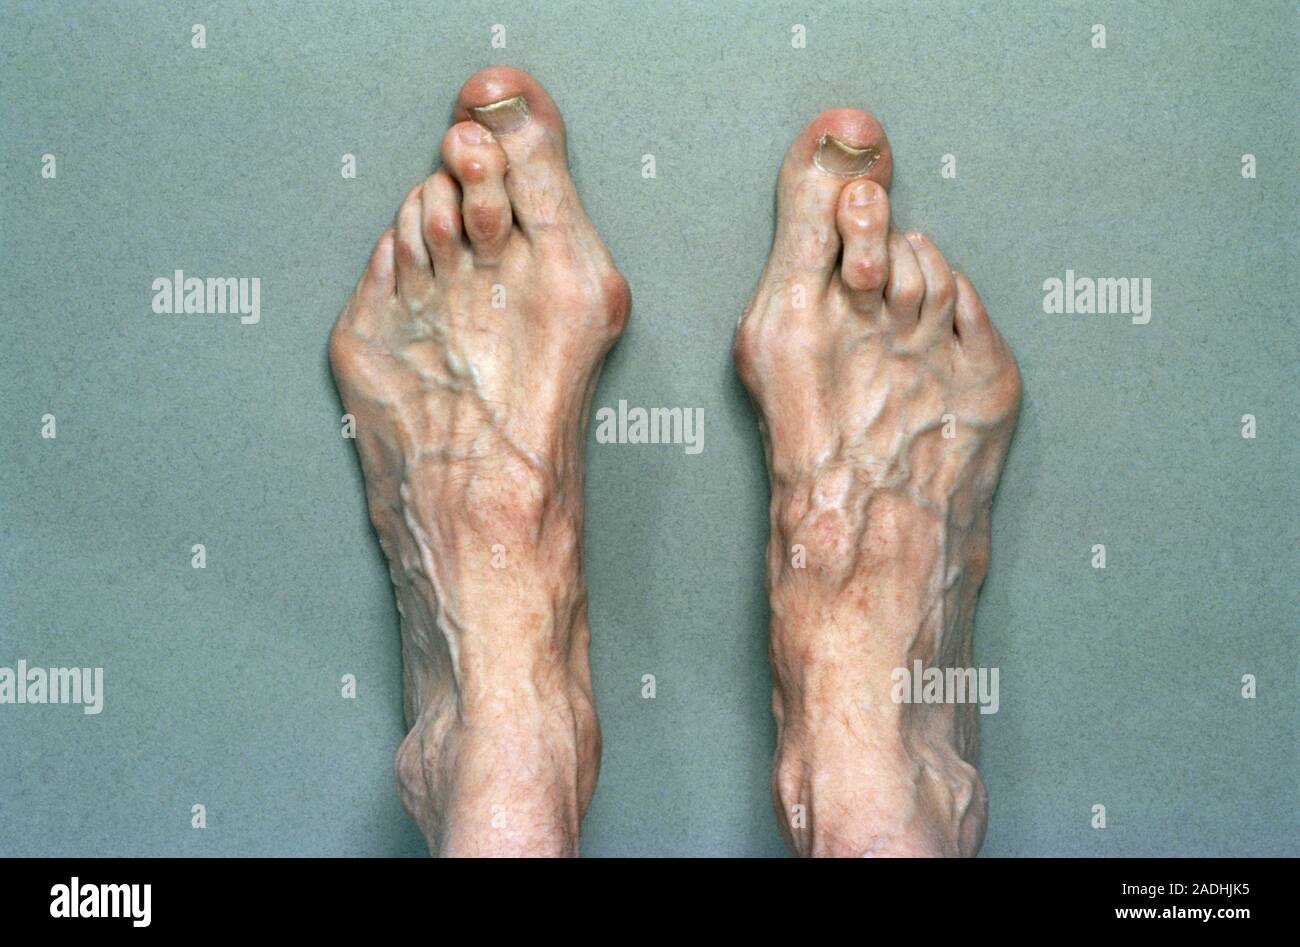 Photograph of the feet of a person suffering from Marfan's syndrome, showing abnormally elongated & slender toes. Marfan's syndrome is an inherited di Stock Photo